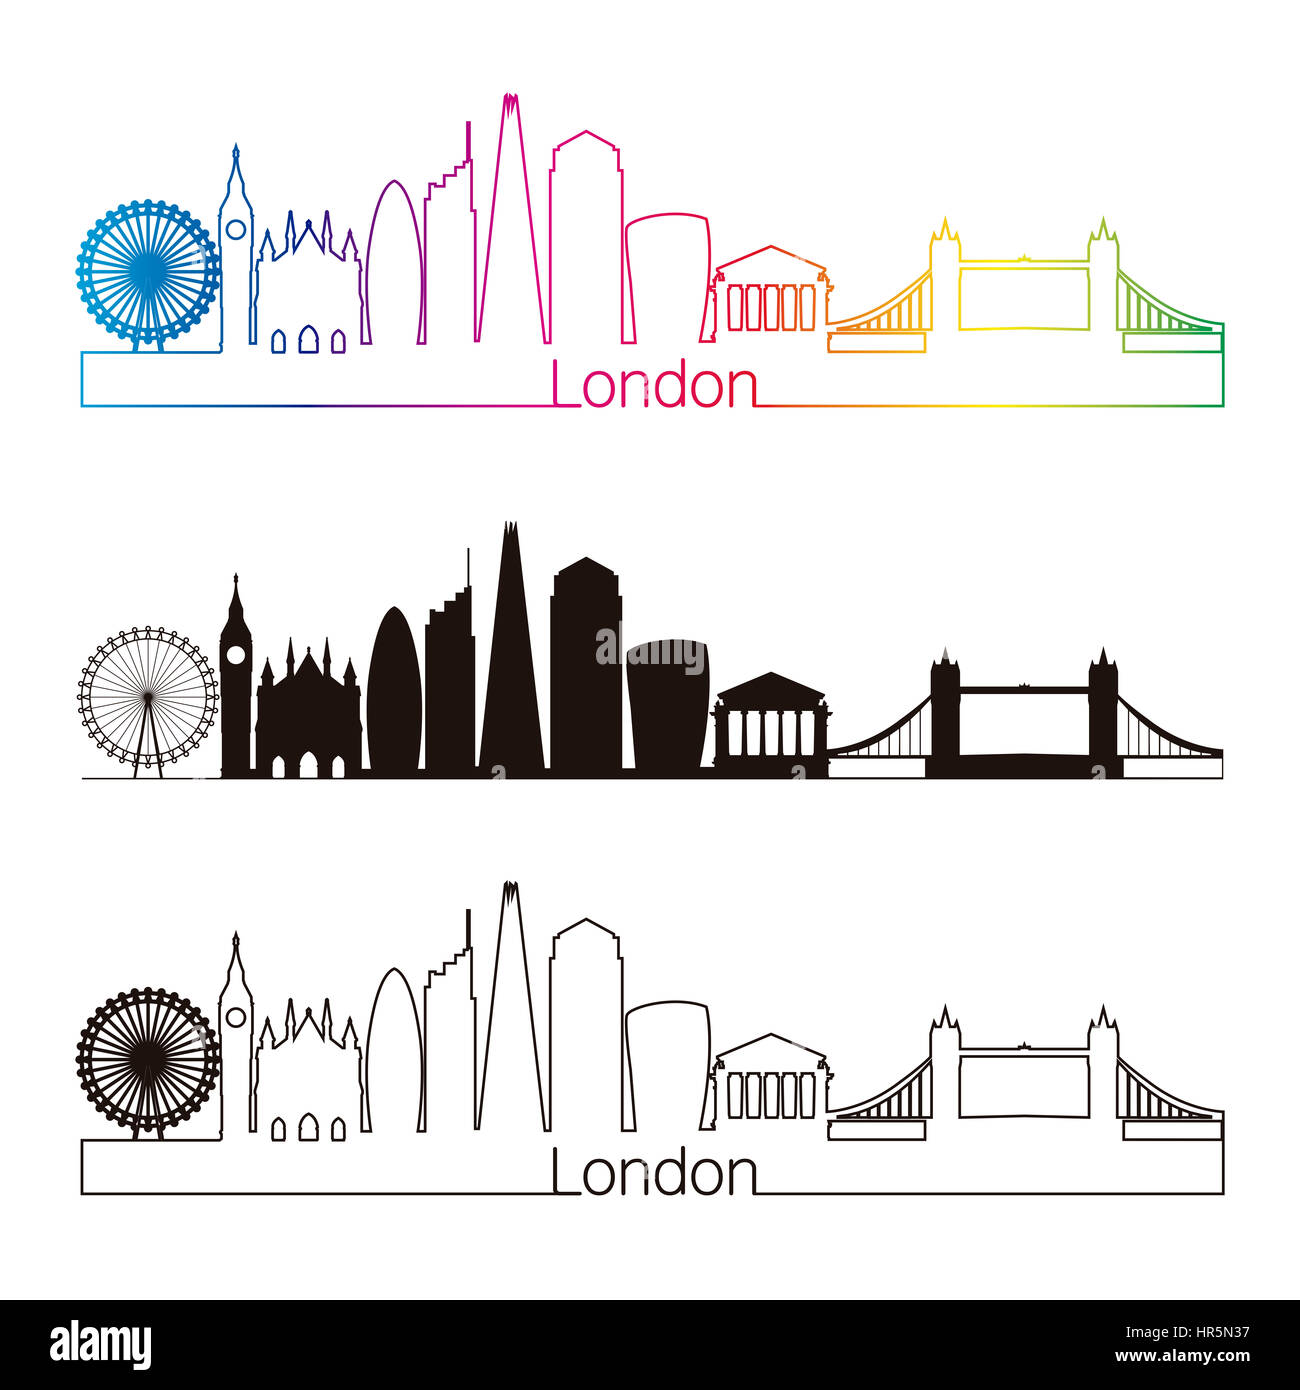 London Skyline Silhouette Cut Out Stock Images Pictures Alamy